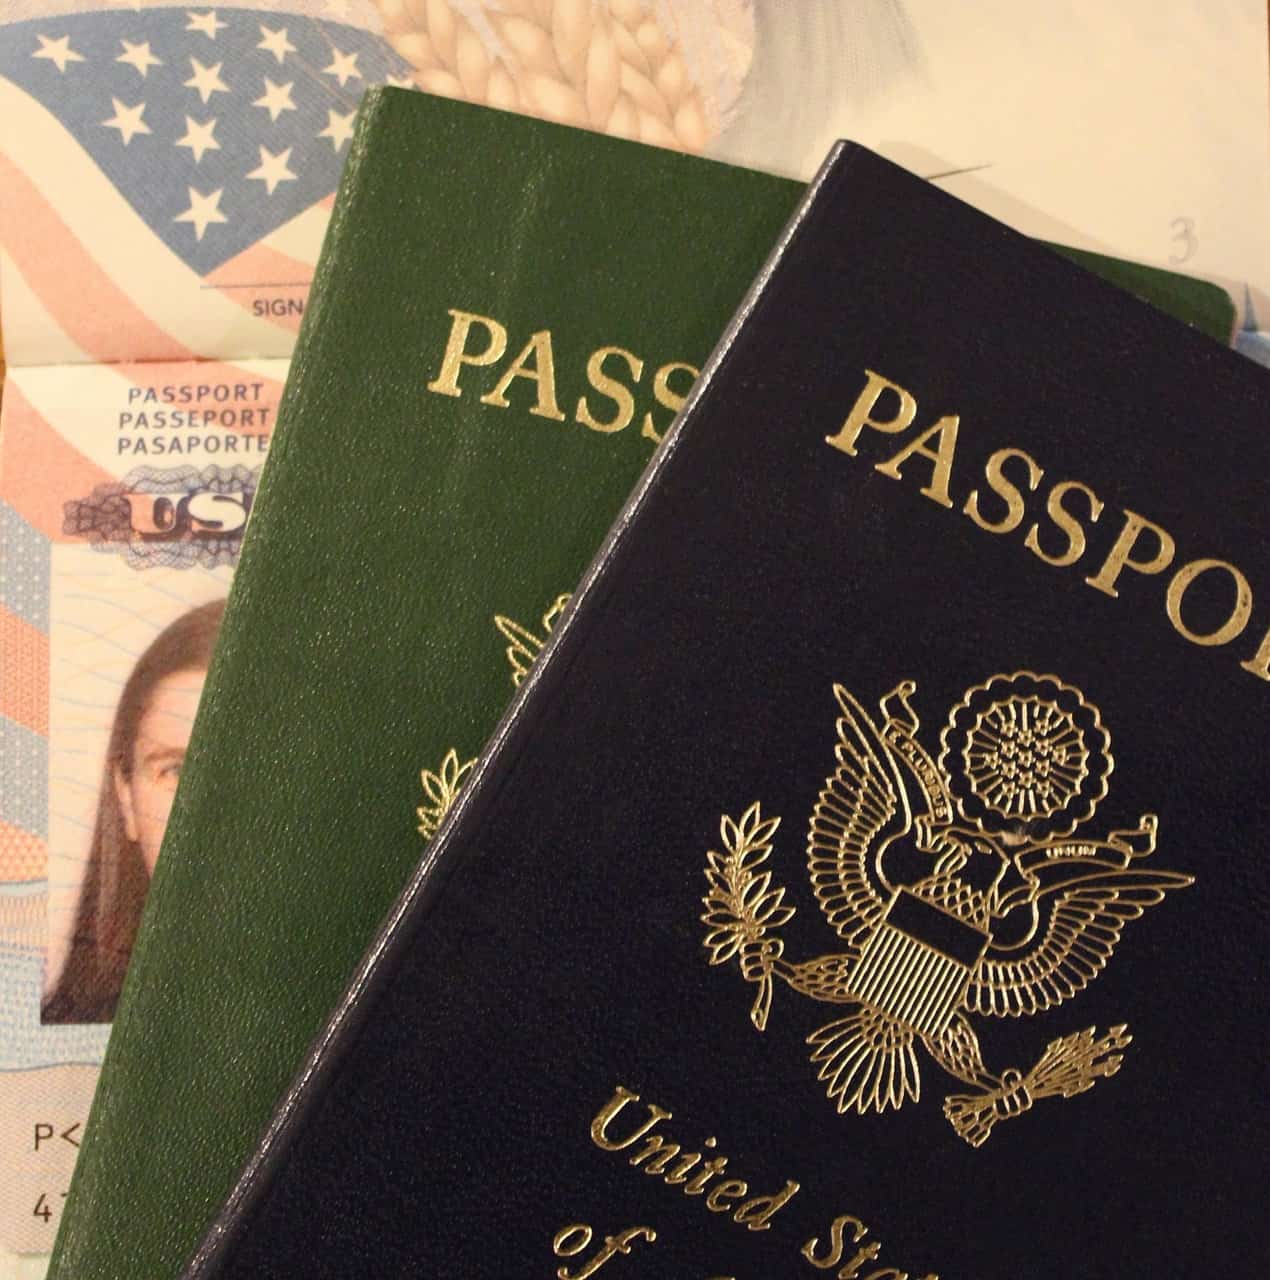 Acquire new citizenship as an immigrant